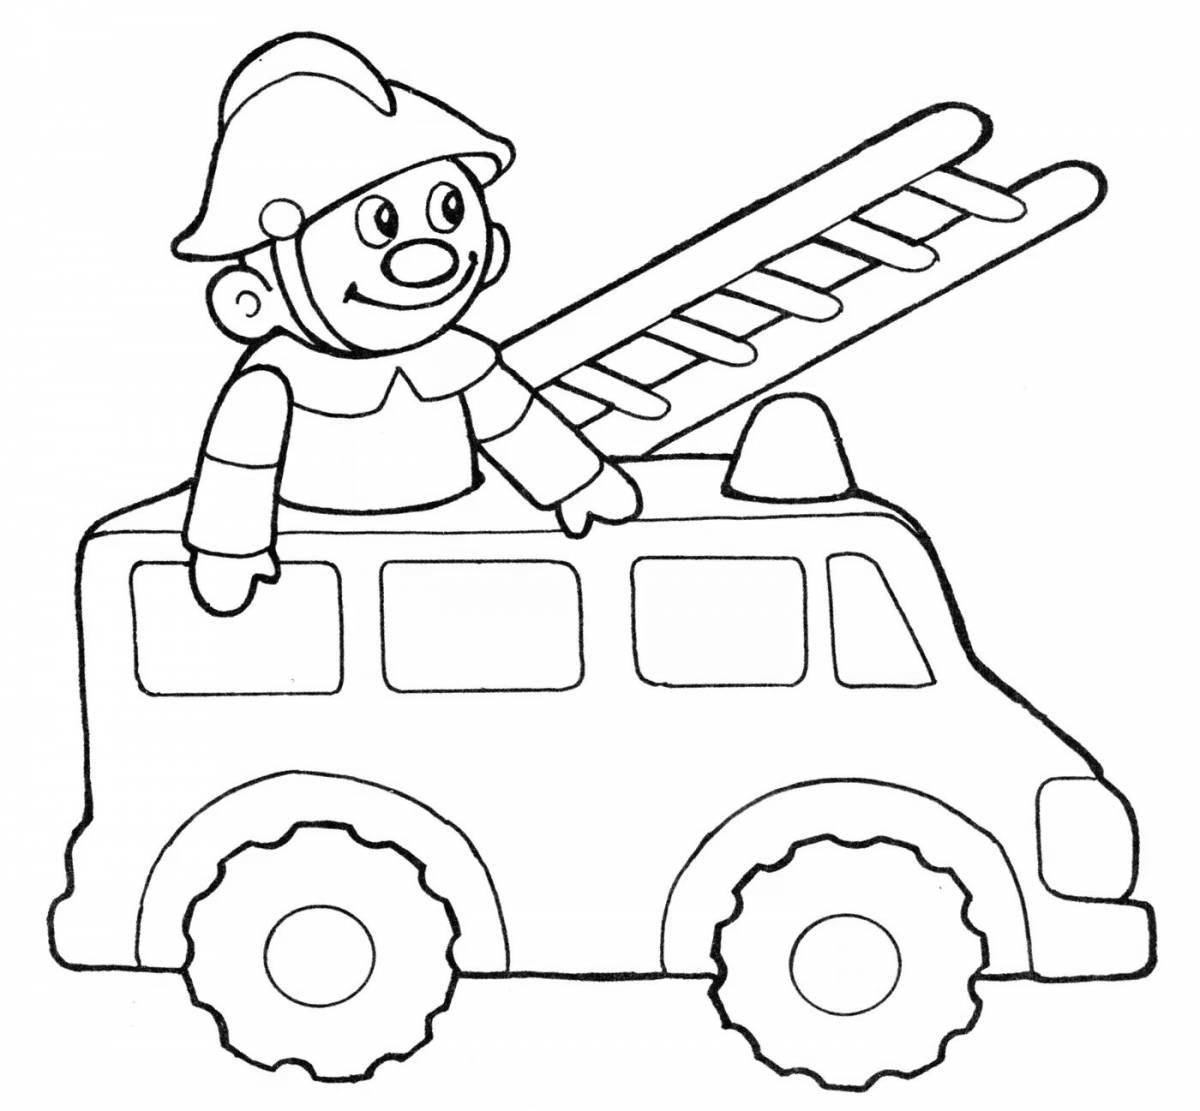 Shiny fire truck coloring book for 2-3 year olds